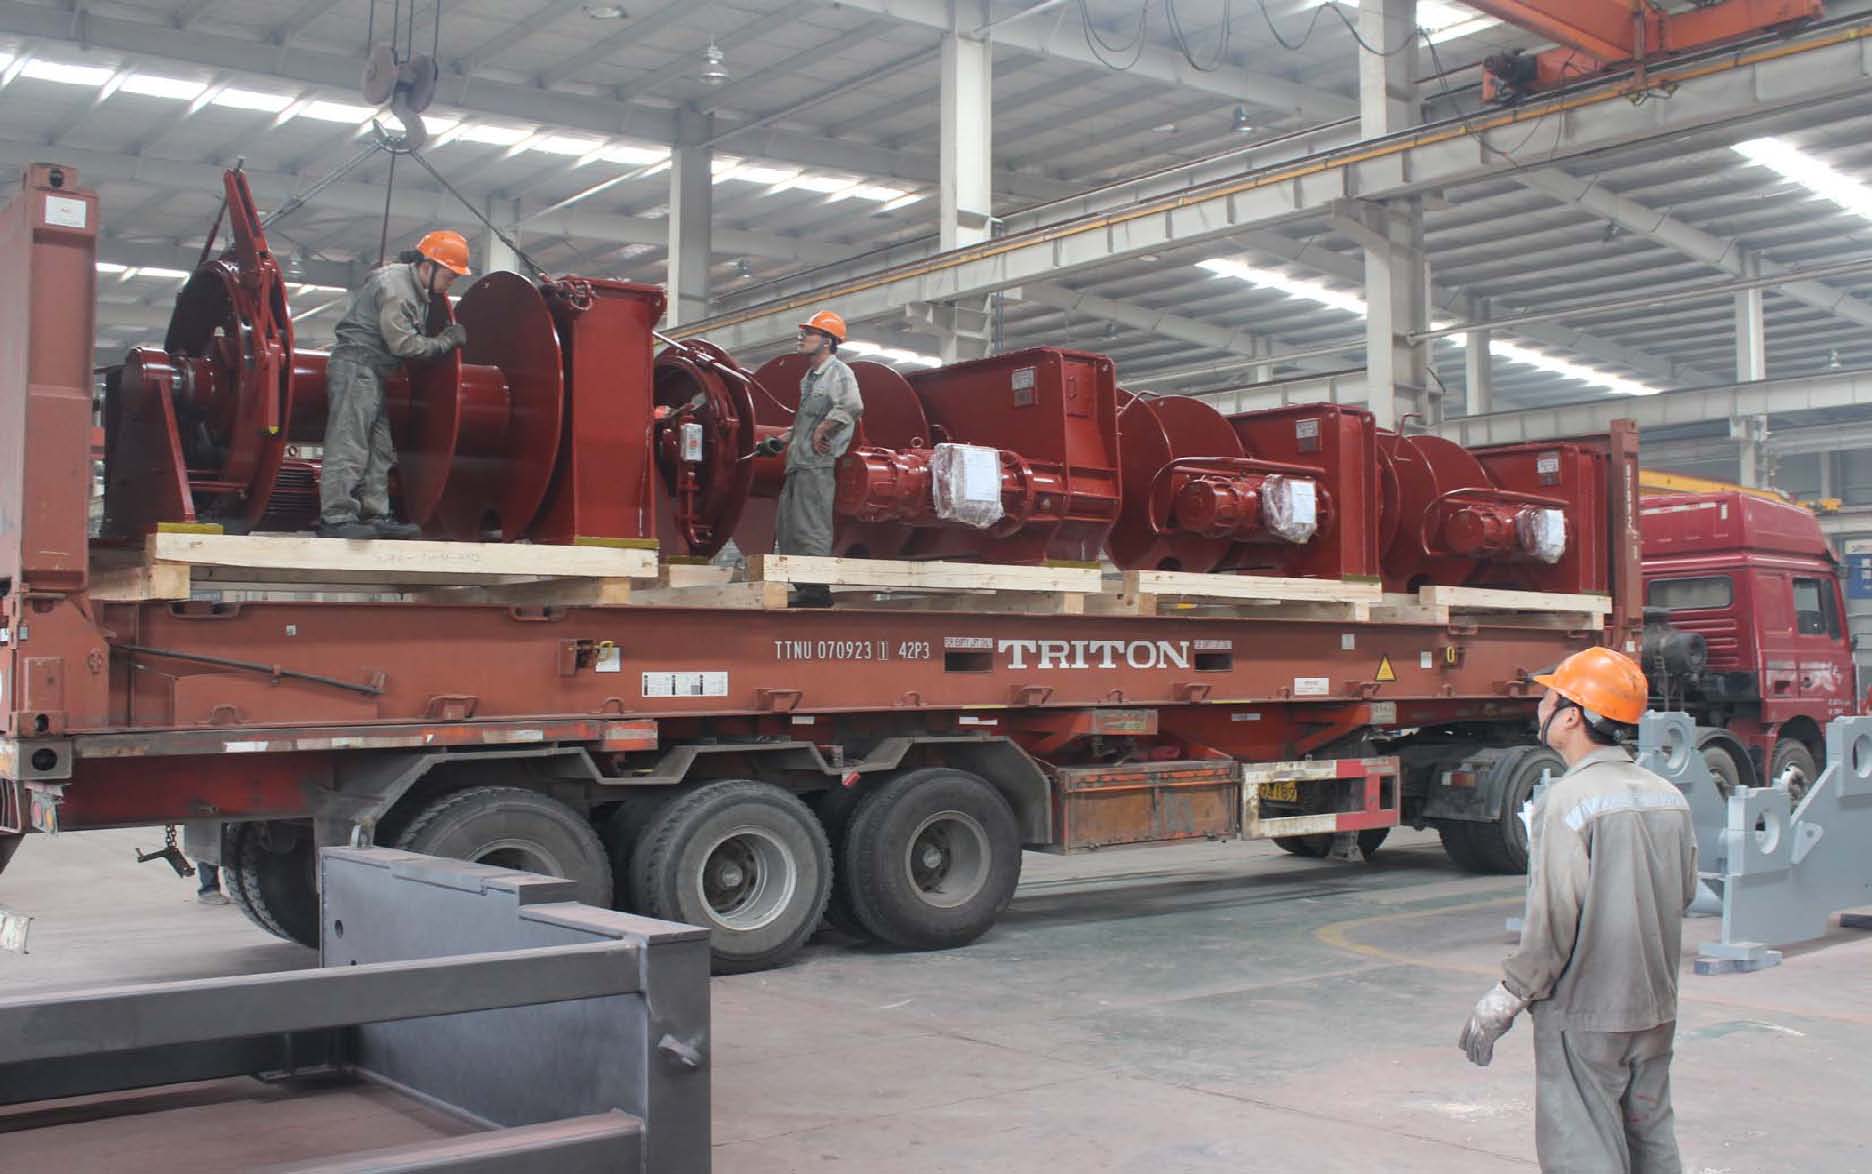 12 sets mooring winches deliver to client